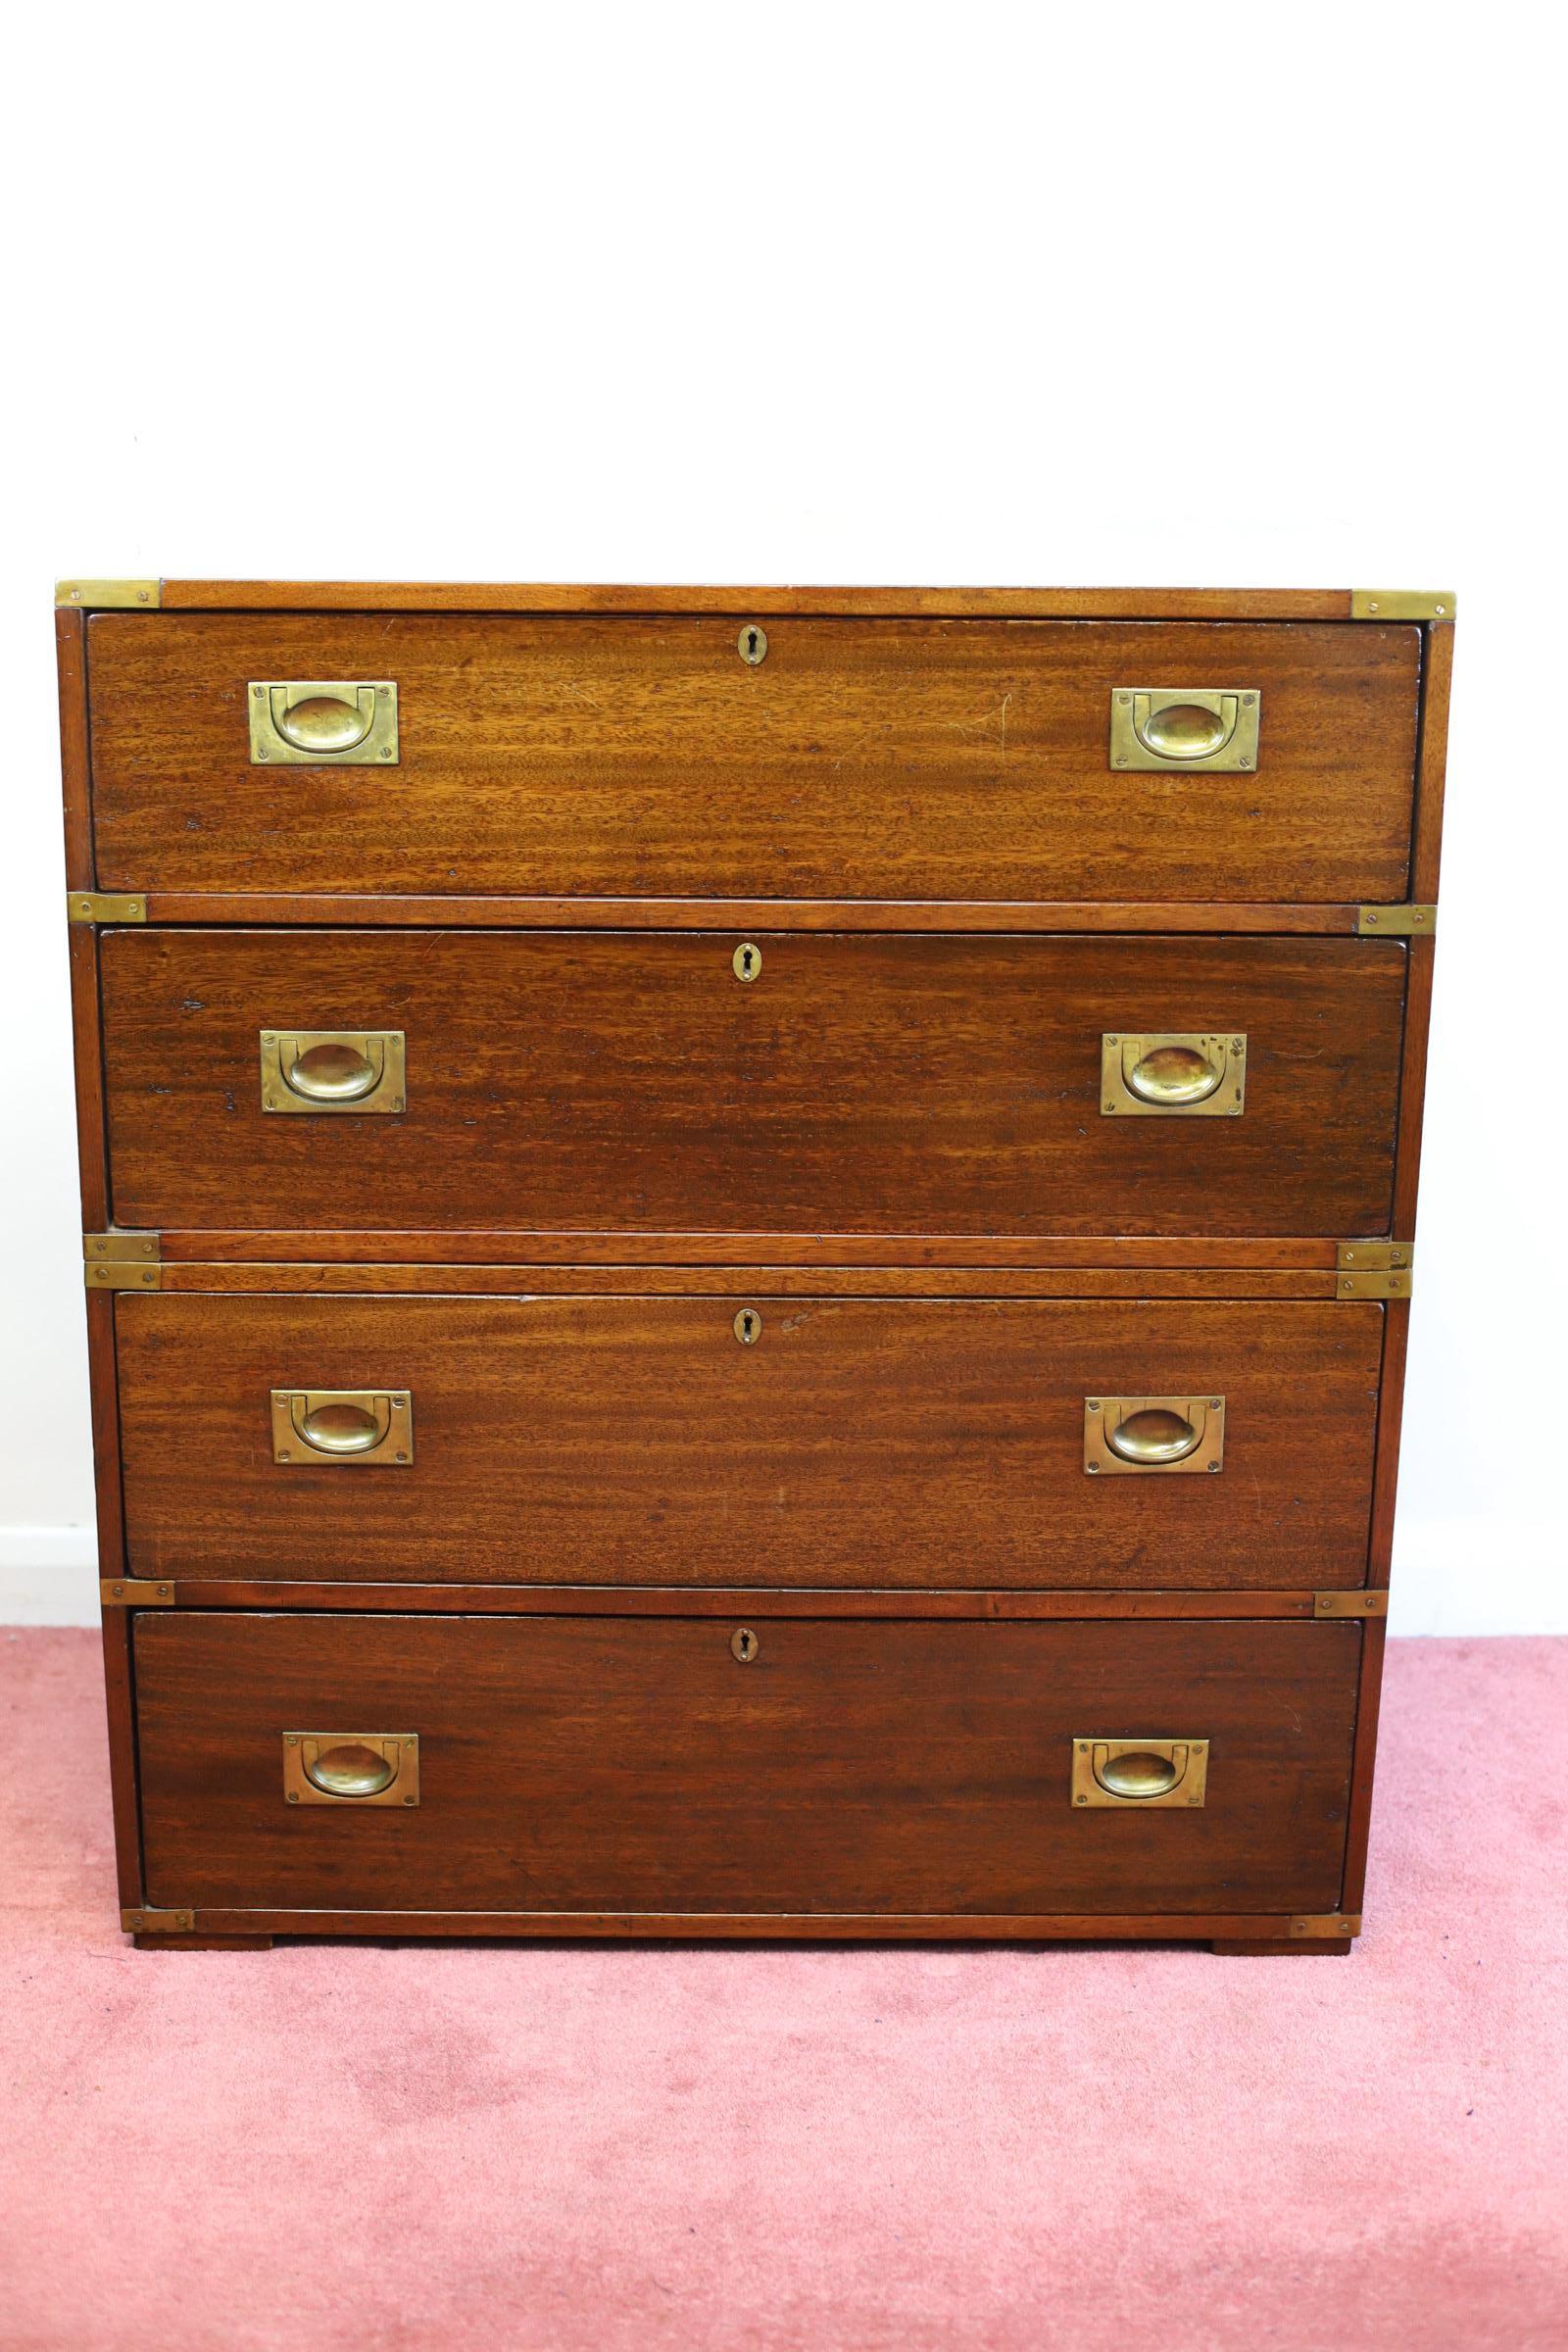 We delight to offer this amazing Military Campaign Chest of Drawers made by Frederick Sage&Company London . It is a great size and is a very useful item. It comes apart in two main pieces, with brass carry handles on the side of each section. There